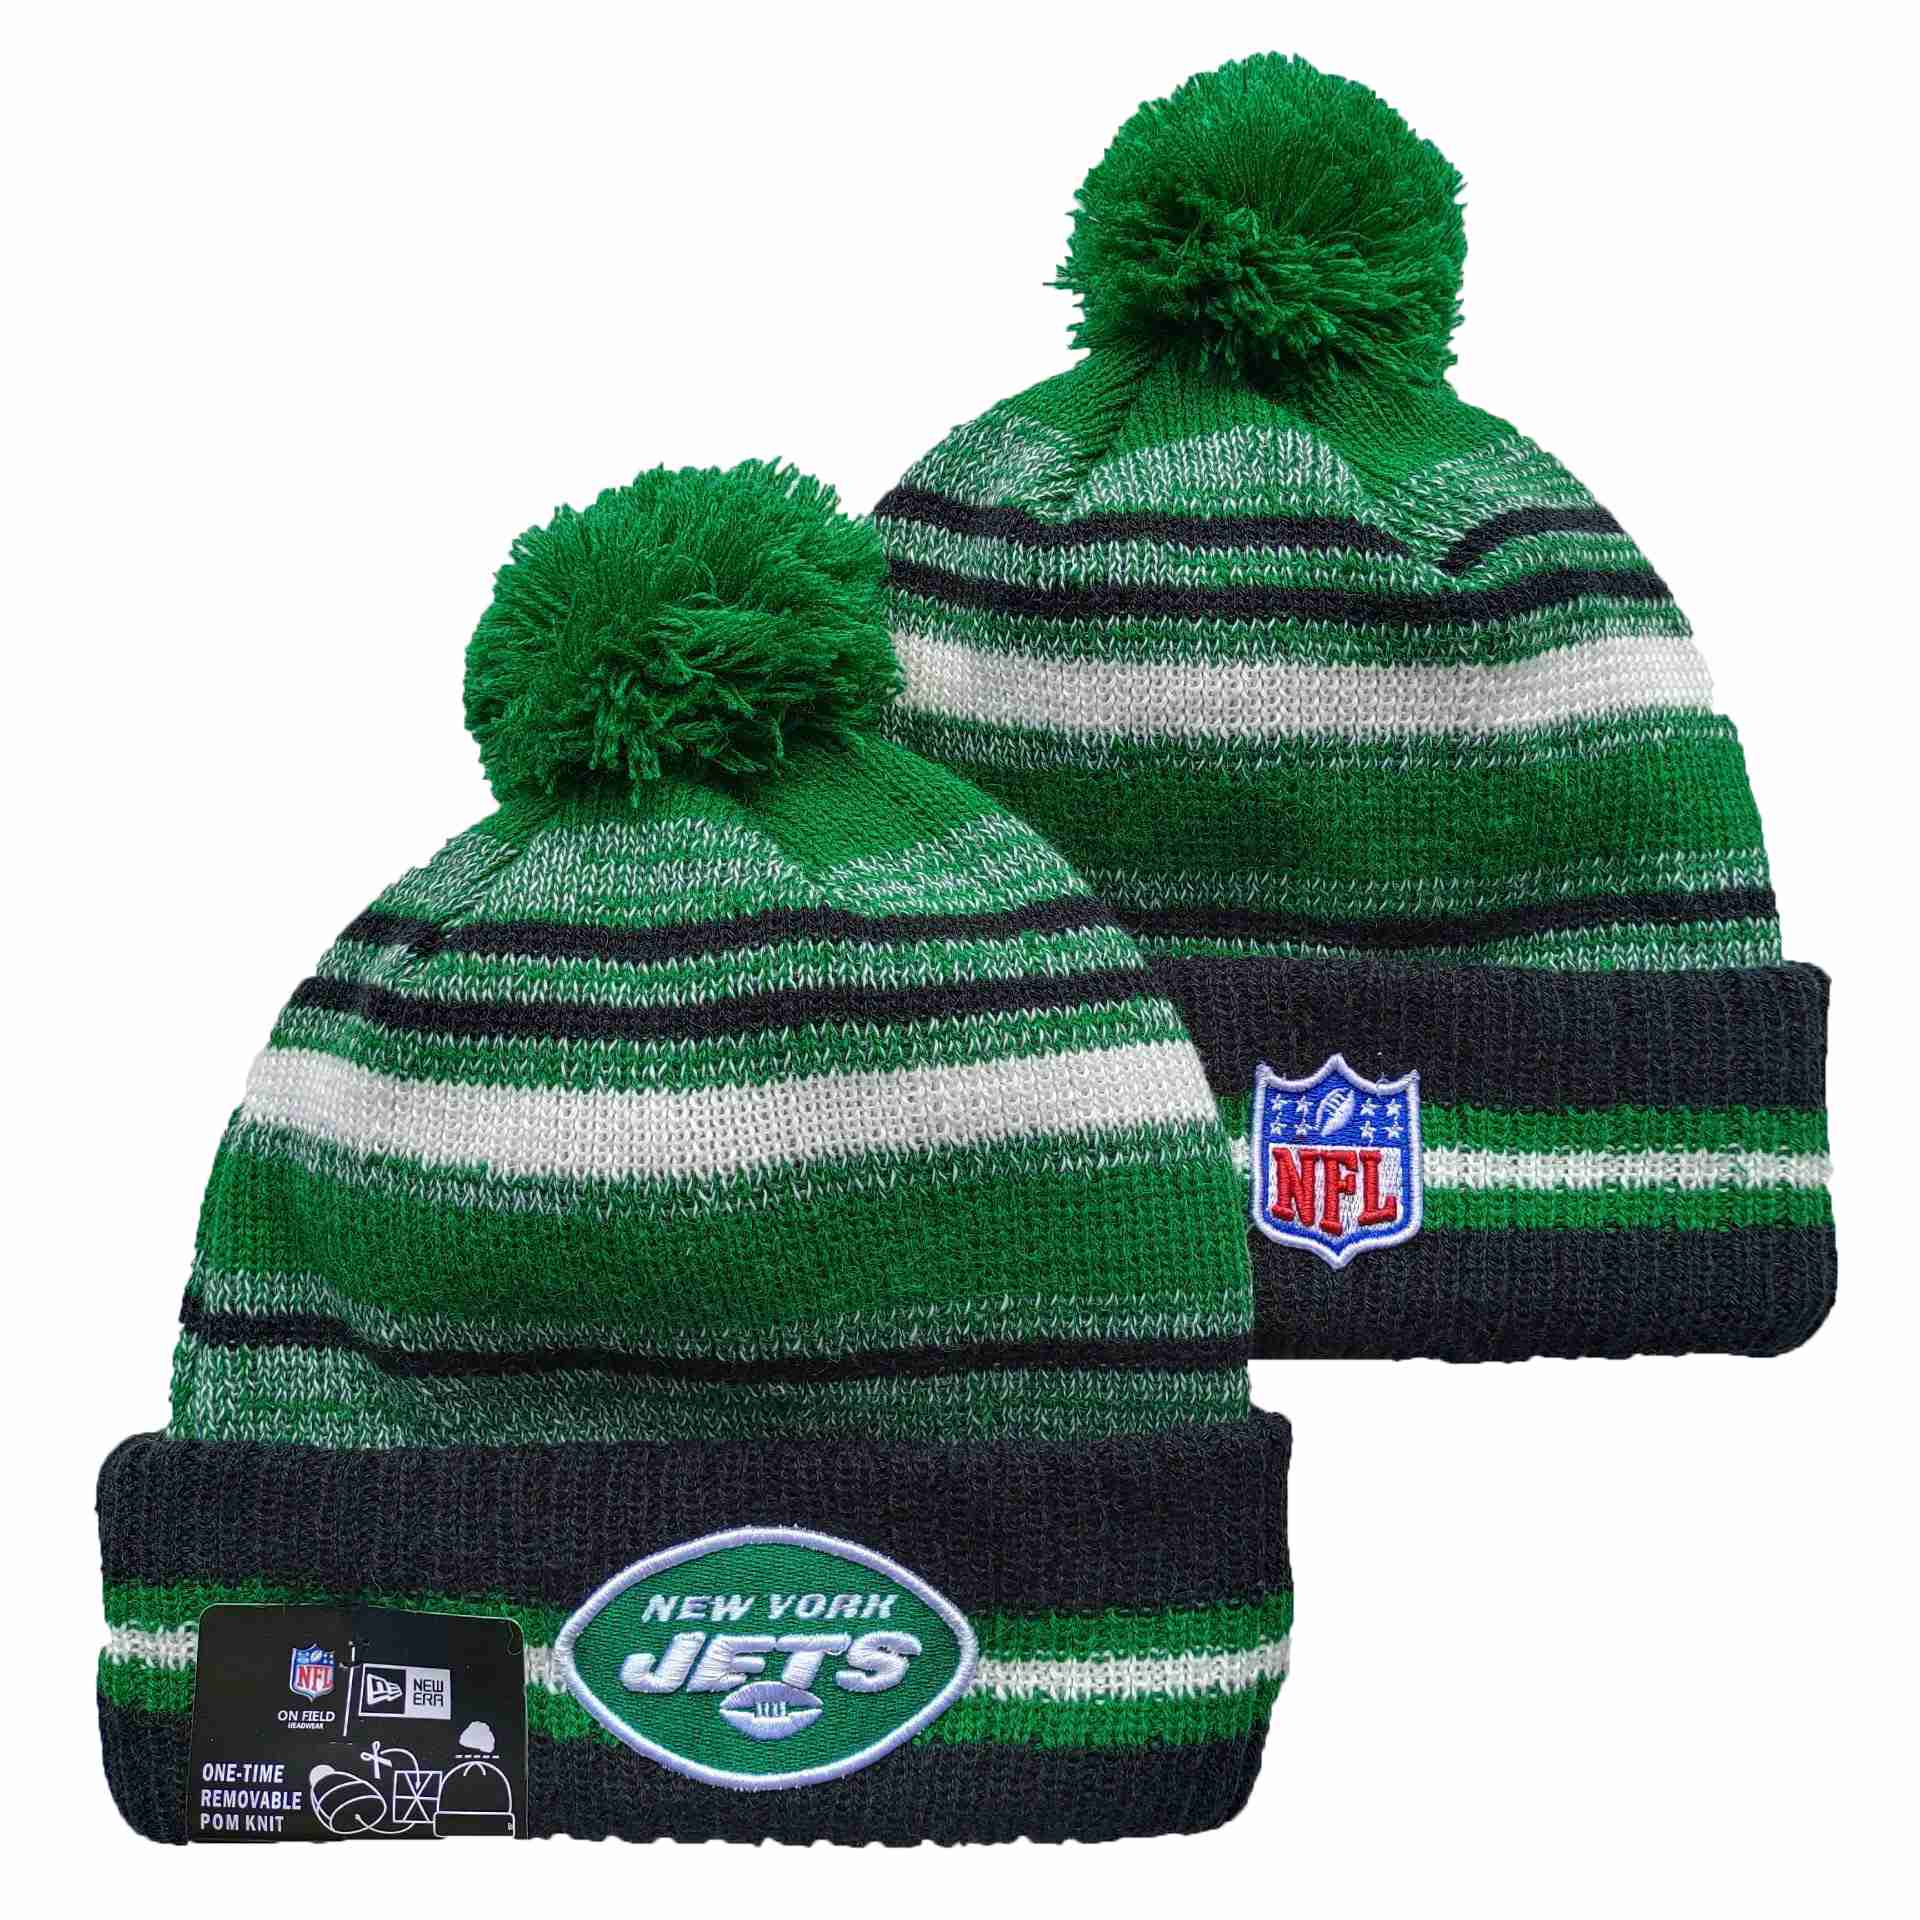 NFL New York Jets Beanies Knit Hats-YD1081